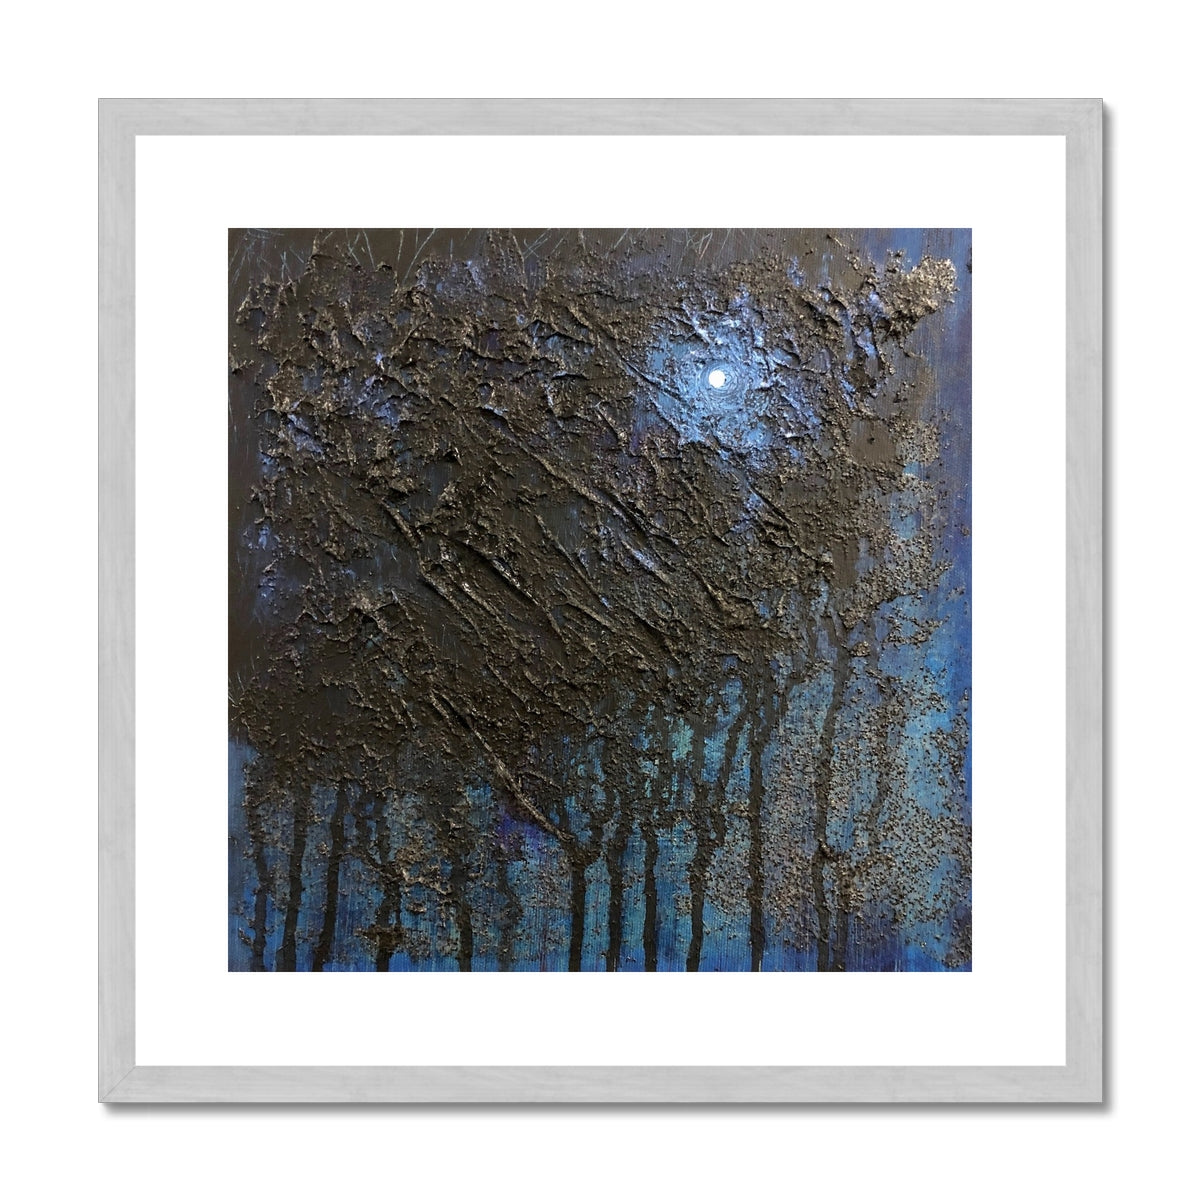 The Blue Moon Wood Abstract Painting | Antique Framed & Mounted Prints From Scotland-Antique Framed & Mounted Prints-Abstract & Impressionistic Art Gallery-20"x20"-Silver Frame-Paintings, Prints, Homeware, Art Gifts From Scotland By Scottish Artist Kevin Hunter